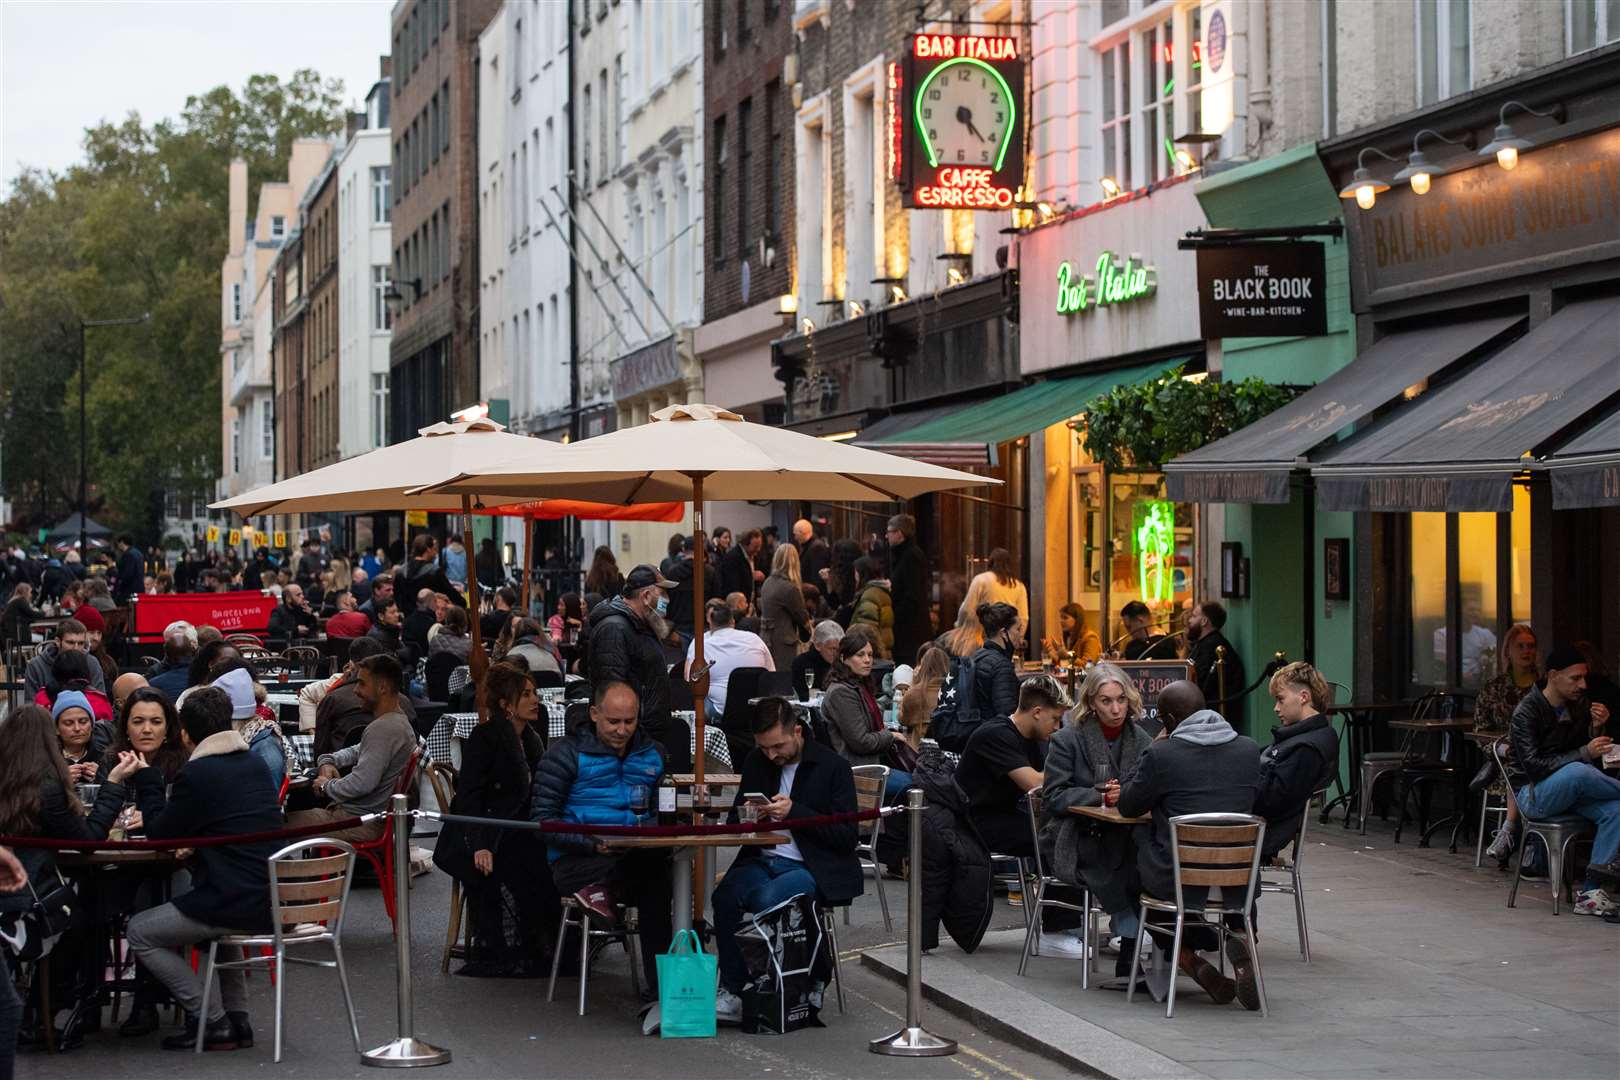 London’s Soho has banned cars so its bustling restaurant scene can host diners in the street (Dominic Lipinski/PA)